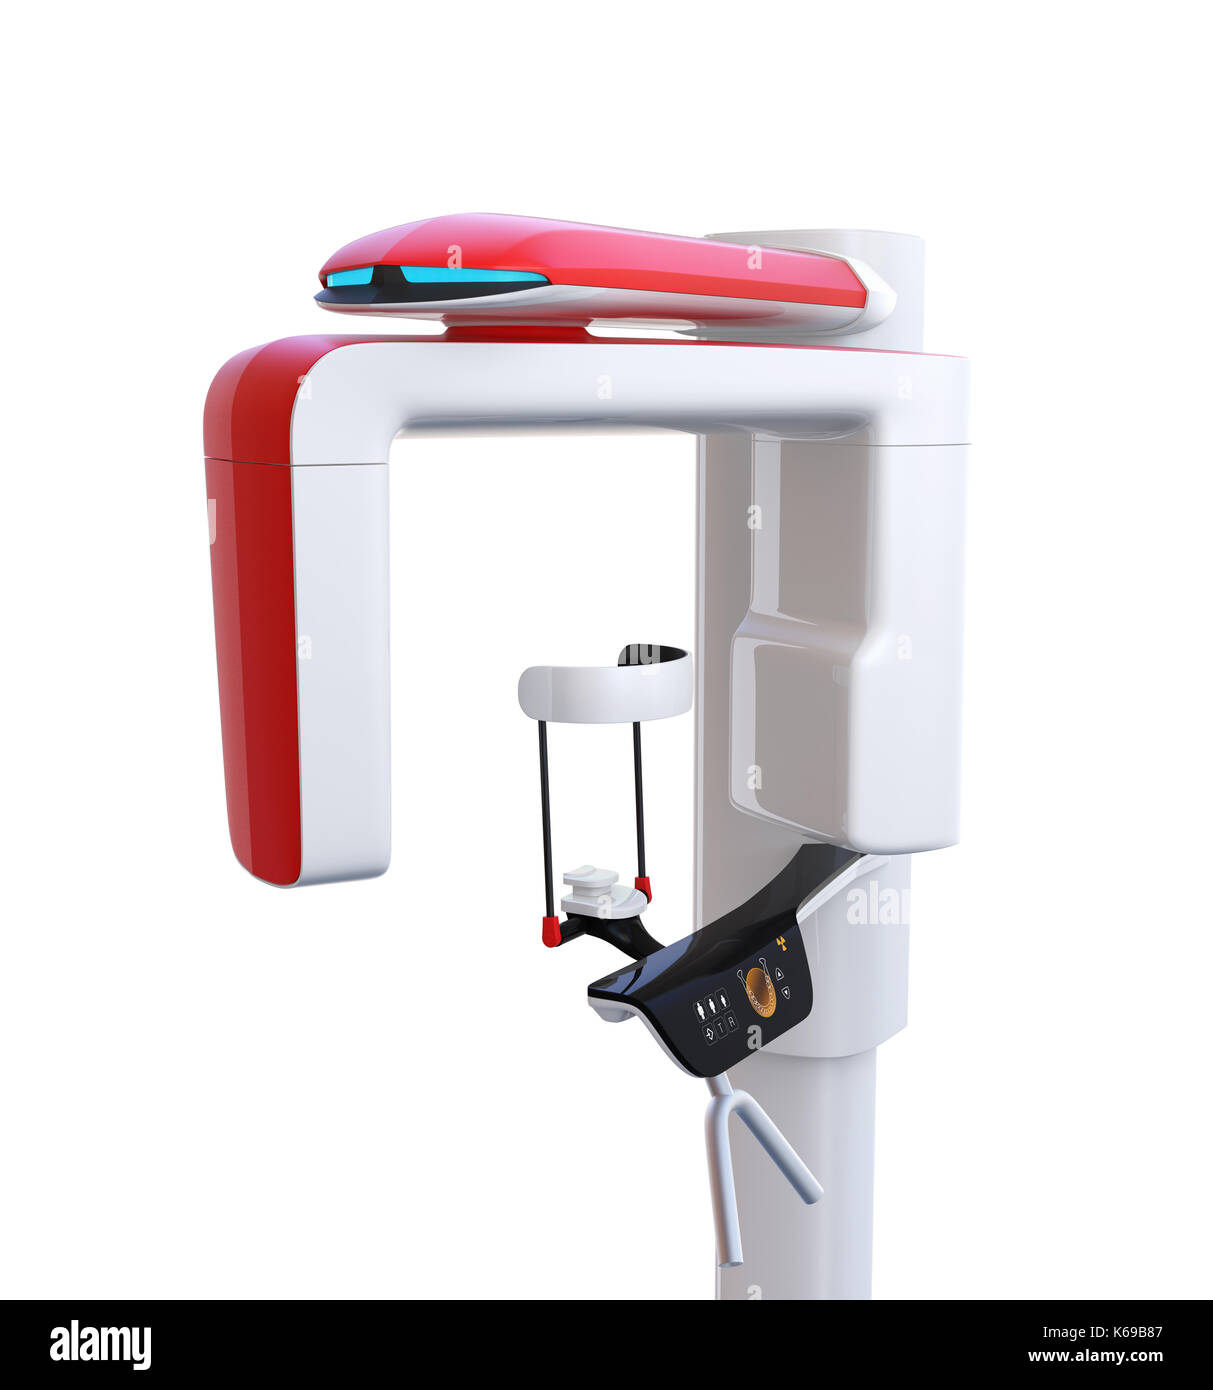 Dental X-ray machine isolated on white background. 3D rendering image. Stock Photo